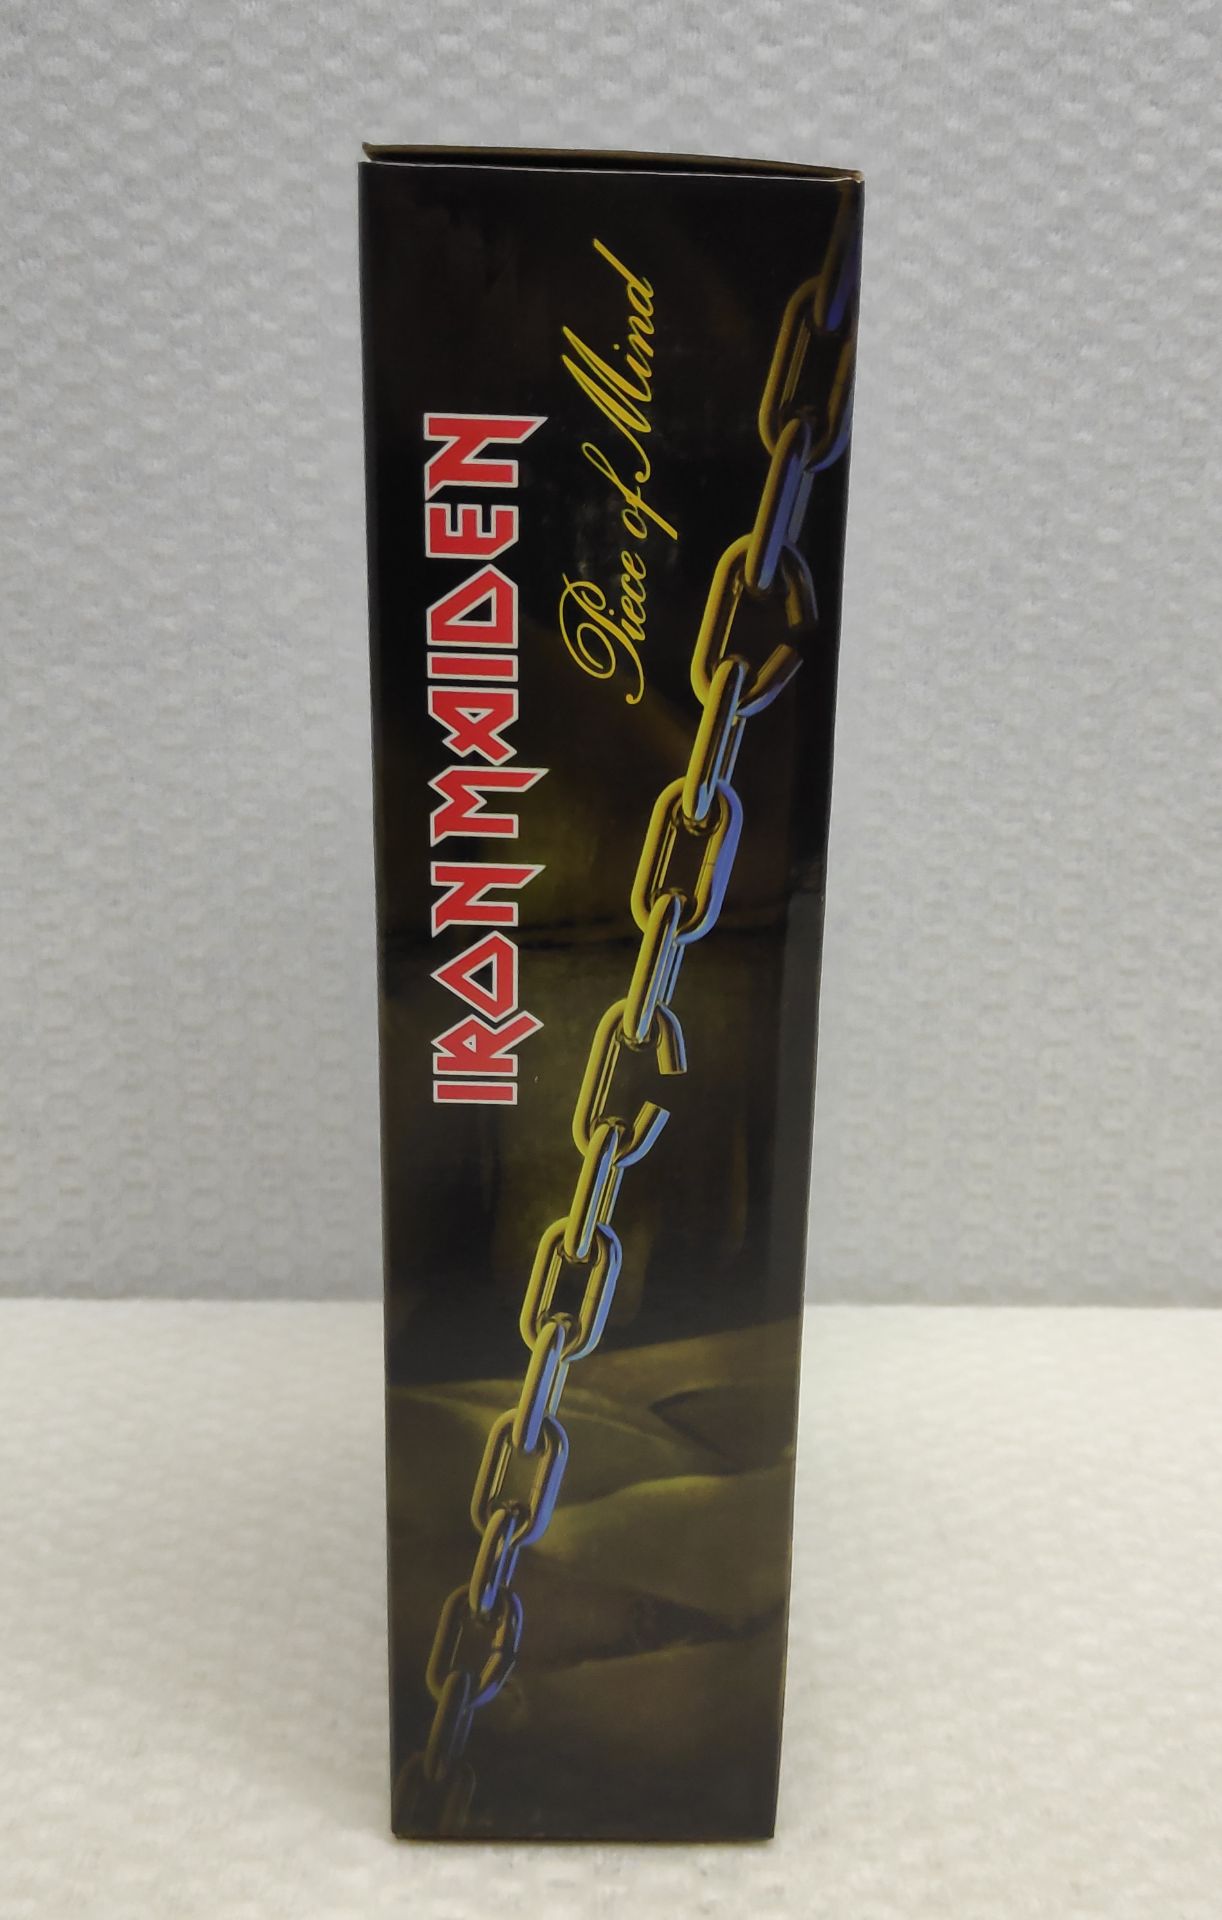 1 x Iron Maiden Eddie Piece of Mind NECA Action Figure - New/Boxed - HTYS166 - CL720 - Location: Alt - Image 9 of 10